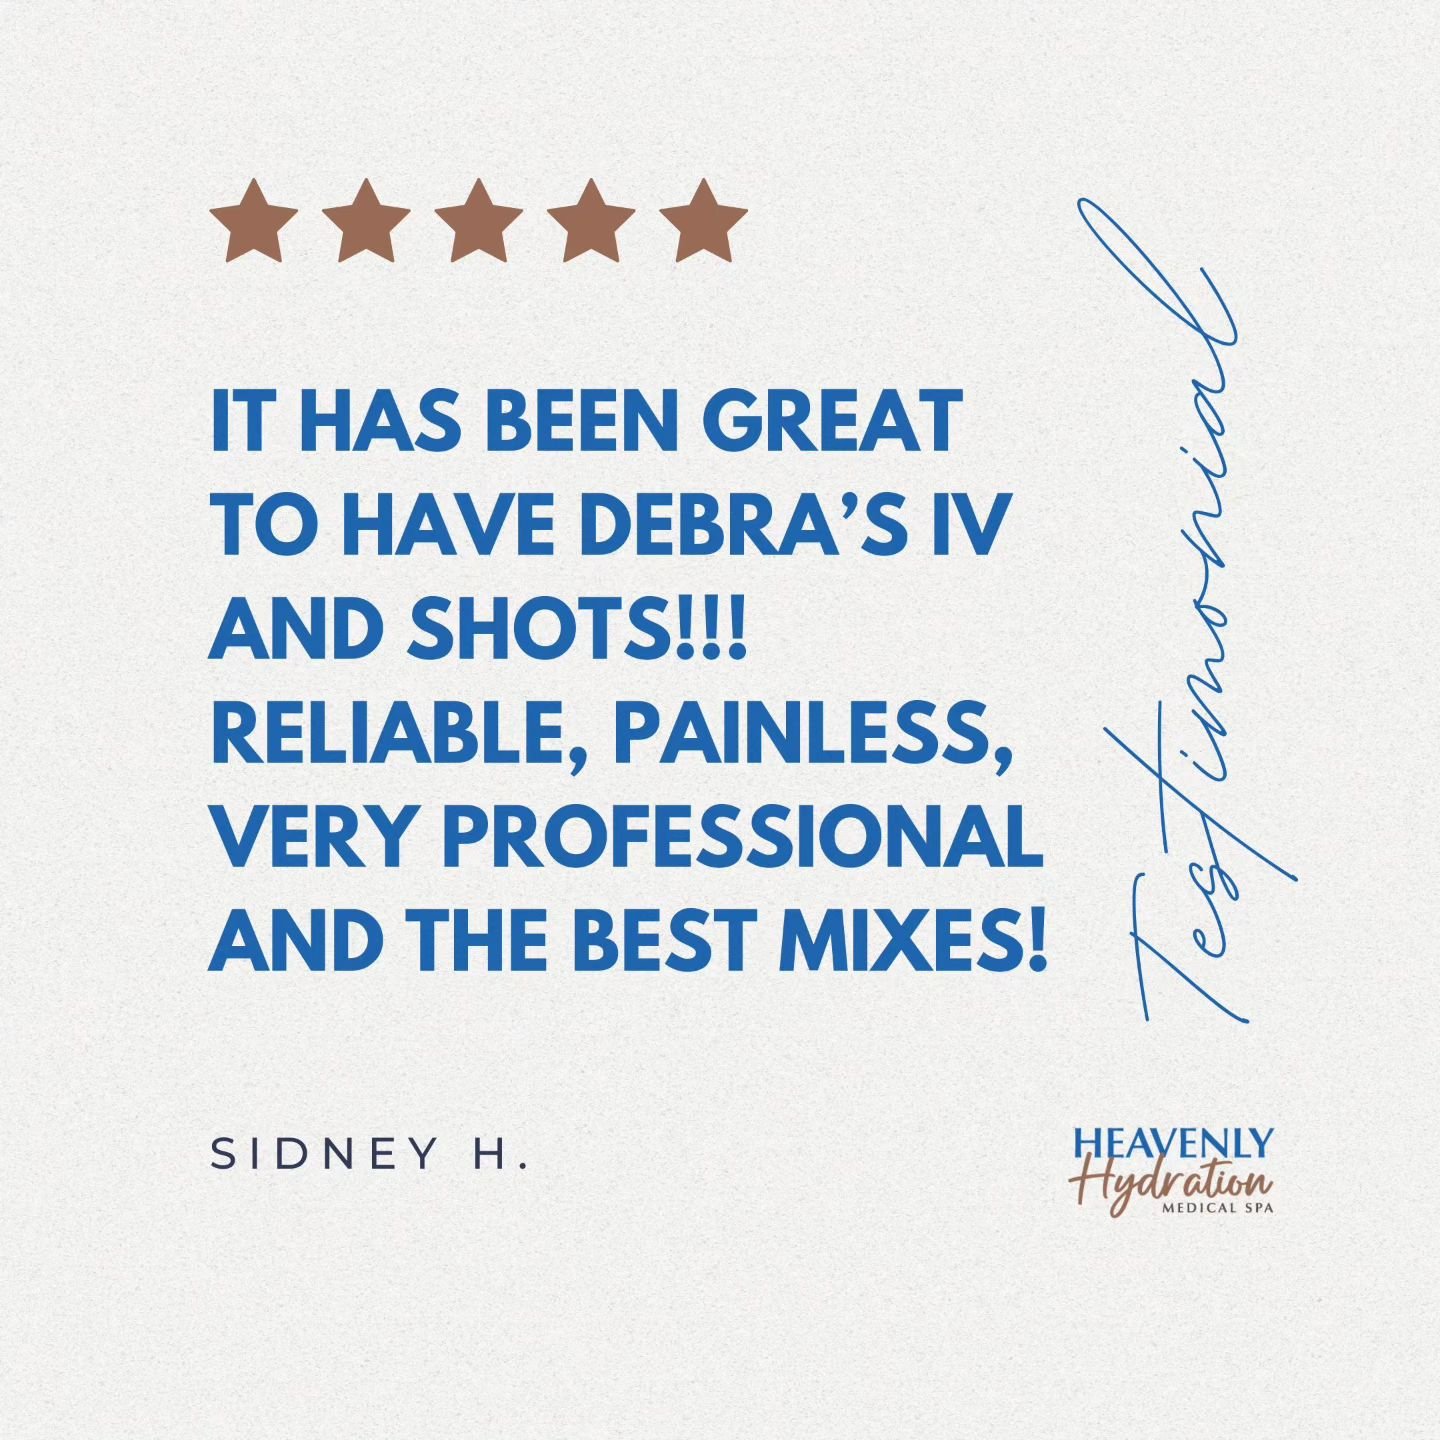 We're so grateful for all the incredible people who choose Heavenly Hydration for their IV therapy needs. You inspire us to keep delivering top-notch care! 

#heavenlyhydrationli #clientslove #happyclients #WellnessJourney